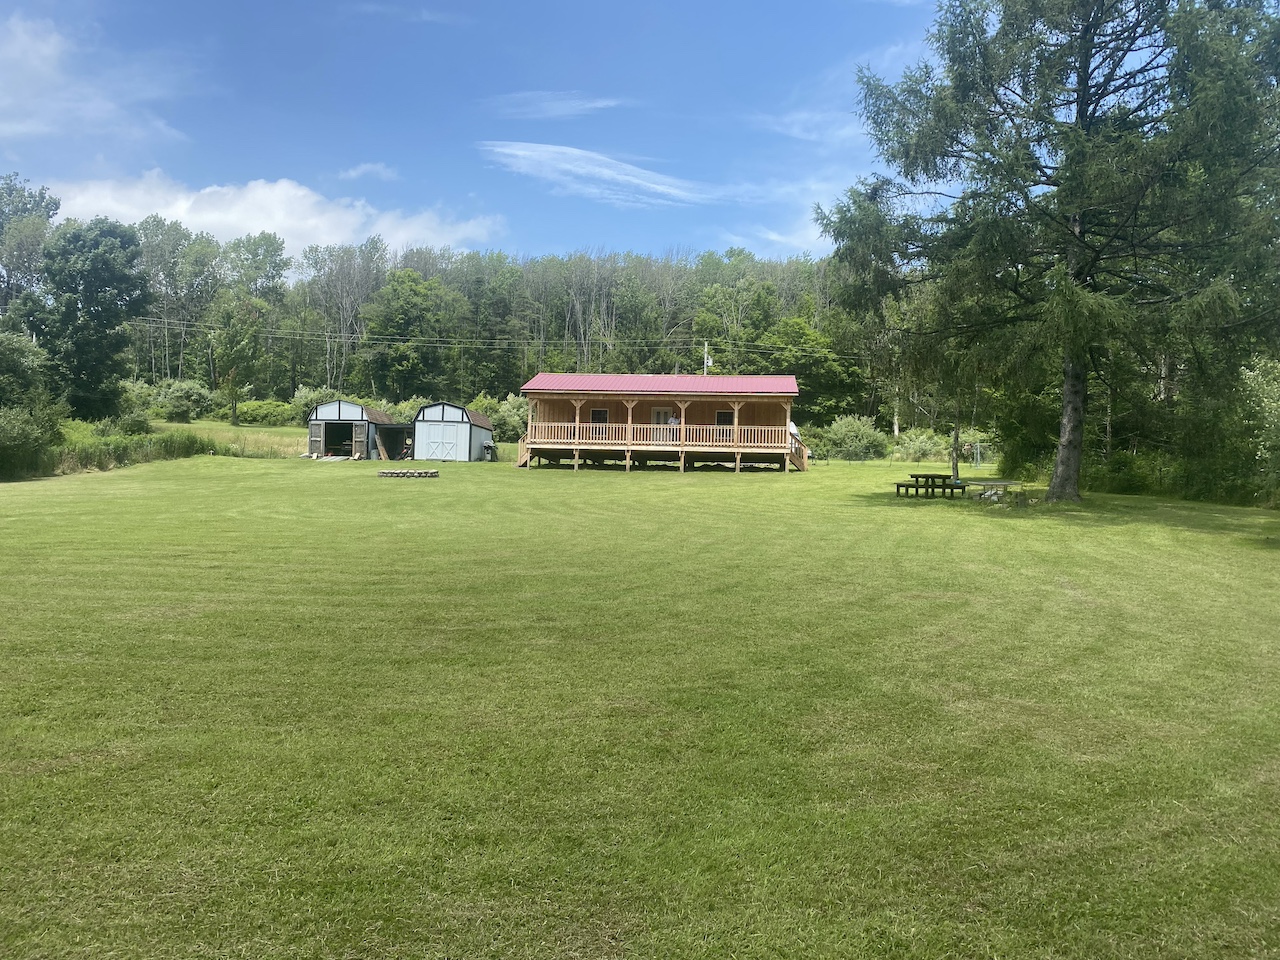 Cabin with Travel Trailer on 10 acres of Hunting Land in Cuba NY 8743 Beebe Hill Rd